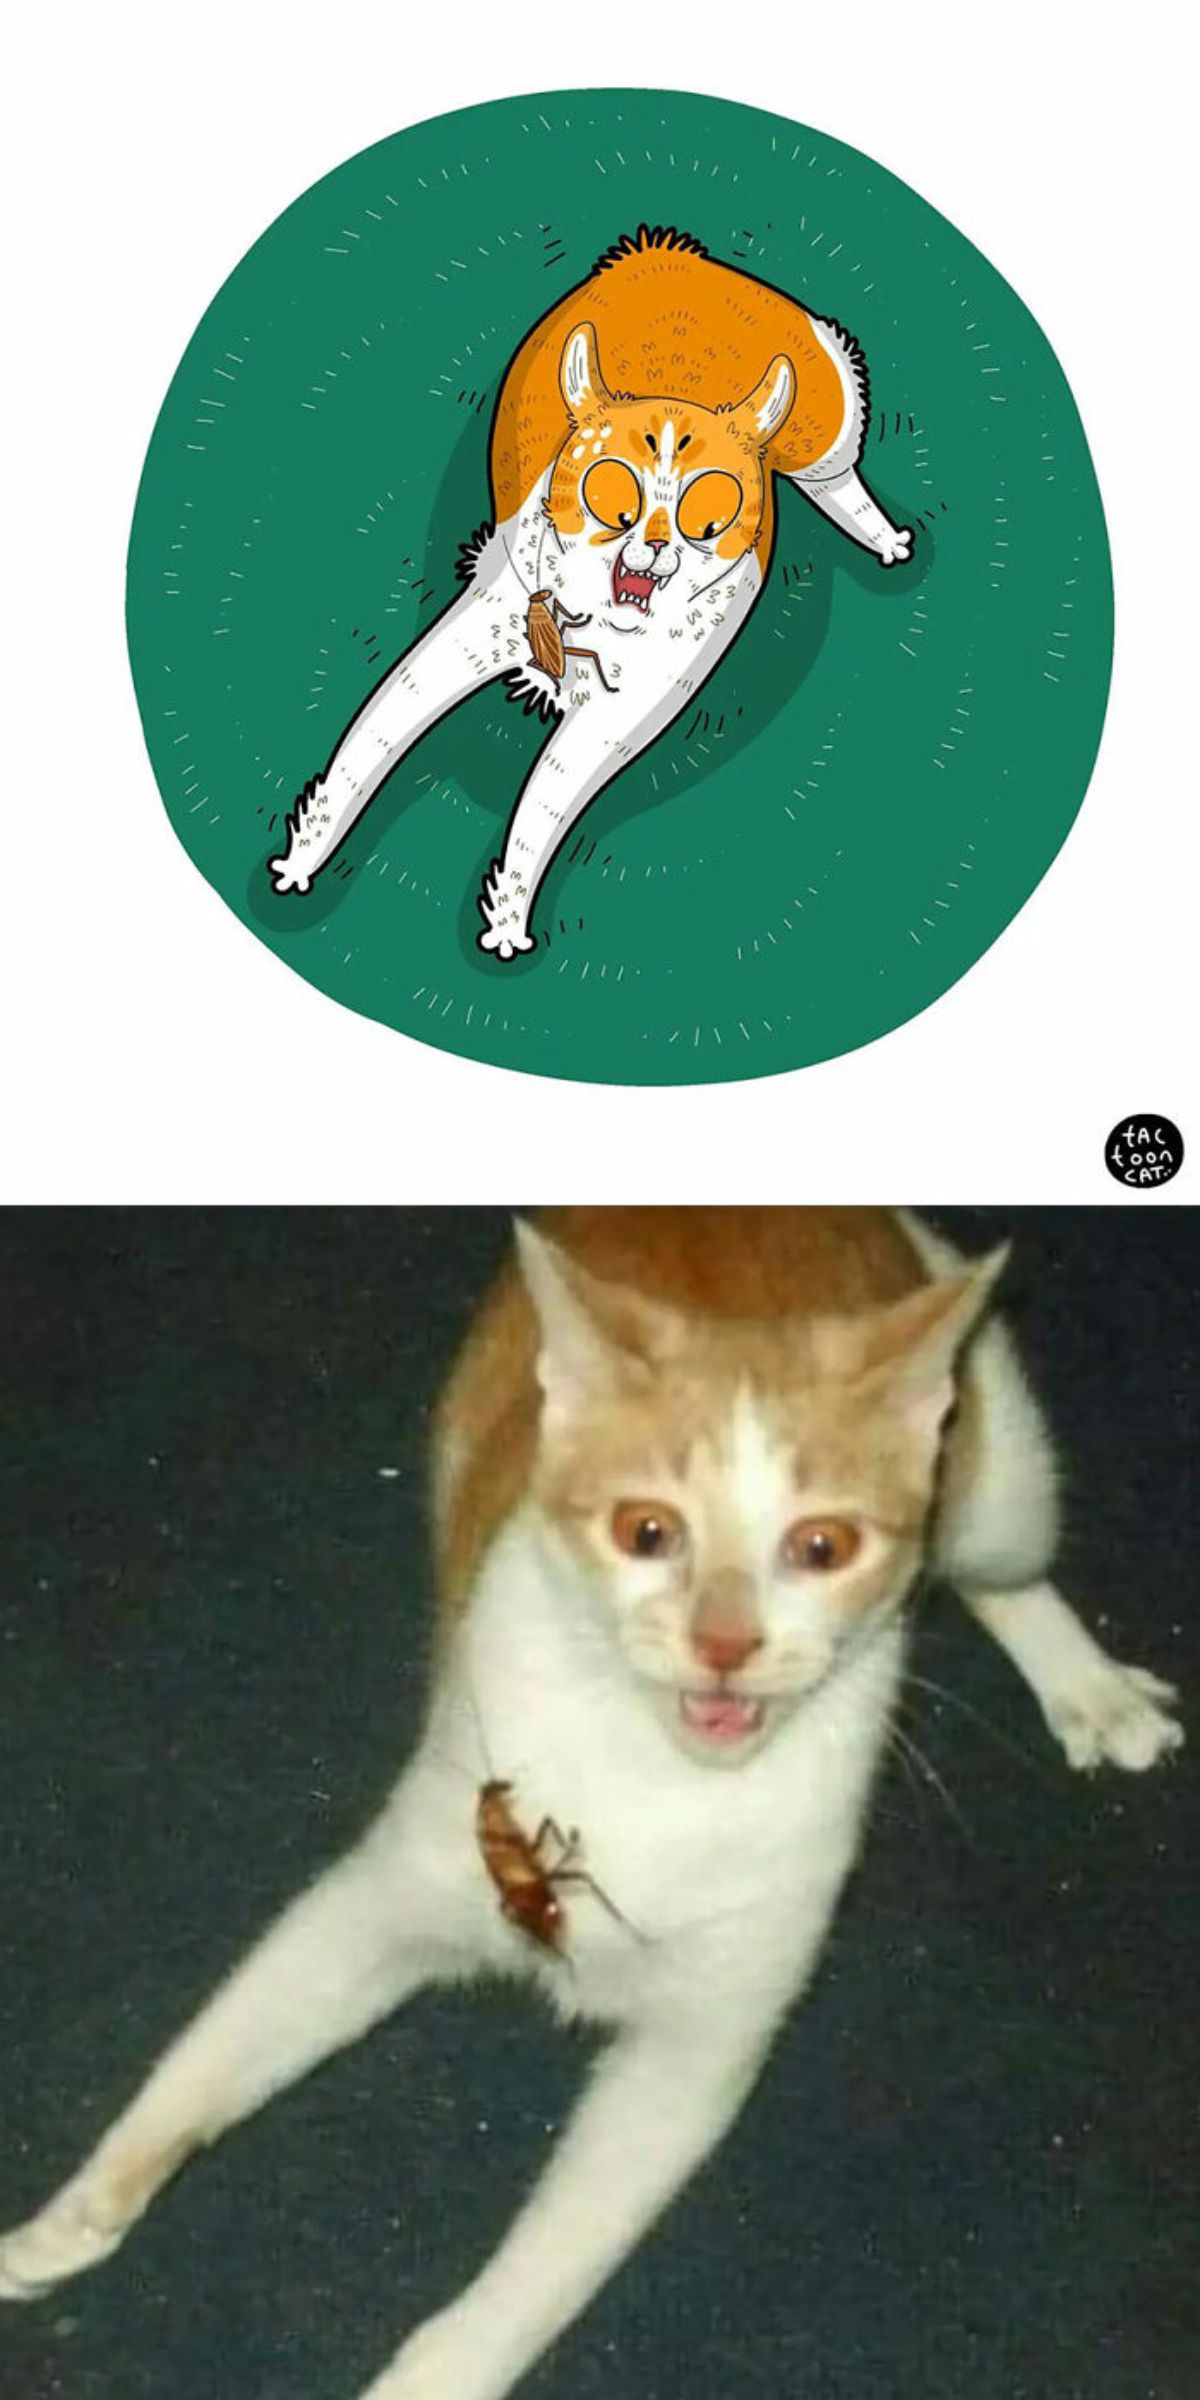 cartoon photo and real photo of an orange and white cat with the front legs extended in front of it with a cockroach on the legs and the cat screaming